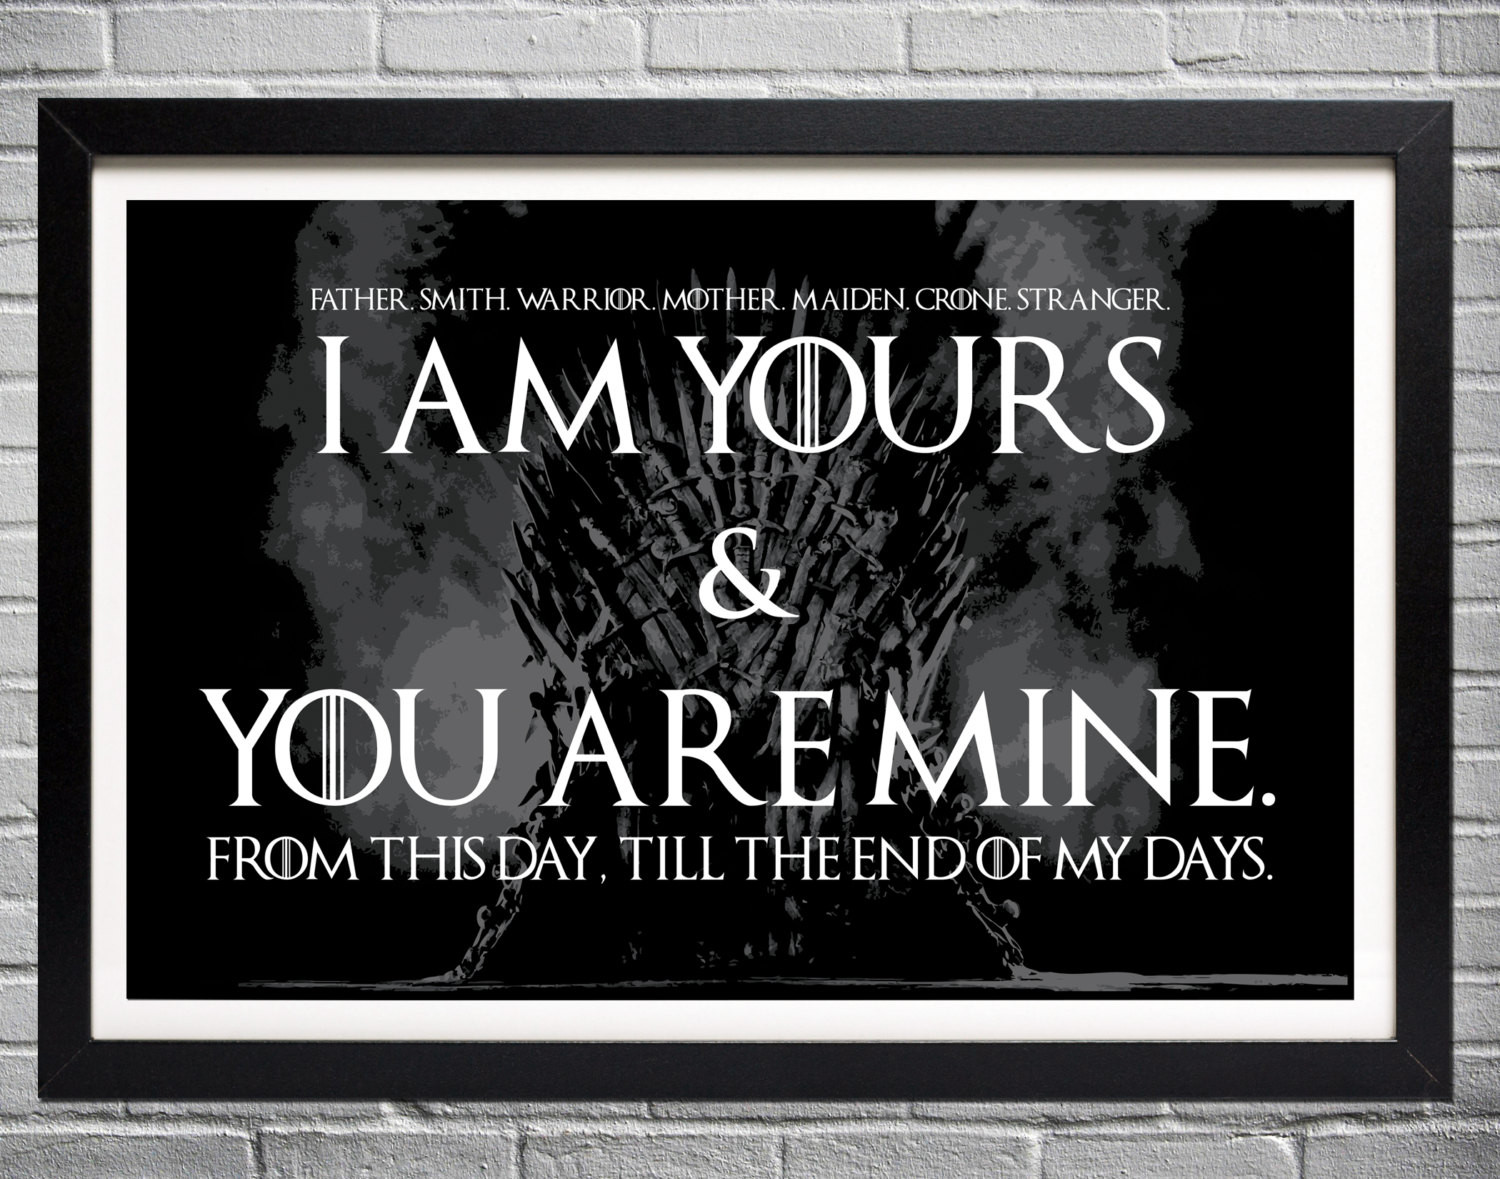 Game Of Thrones Wedding Vows
 Game of Thrones Wedding Vows I am yours and you are mine